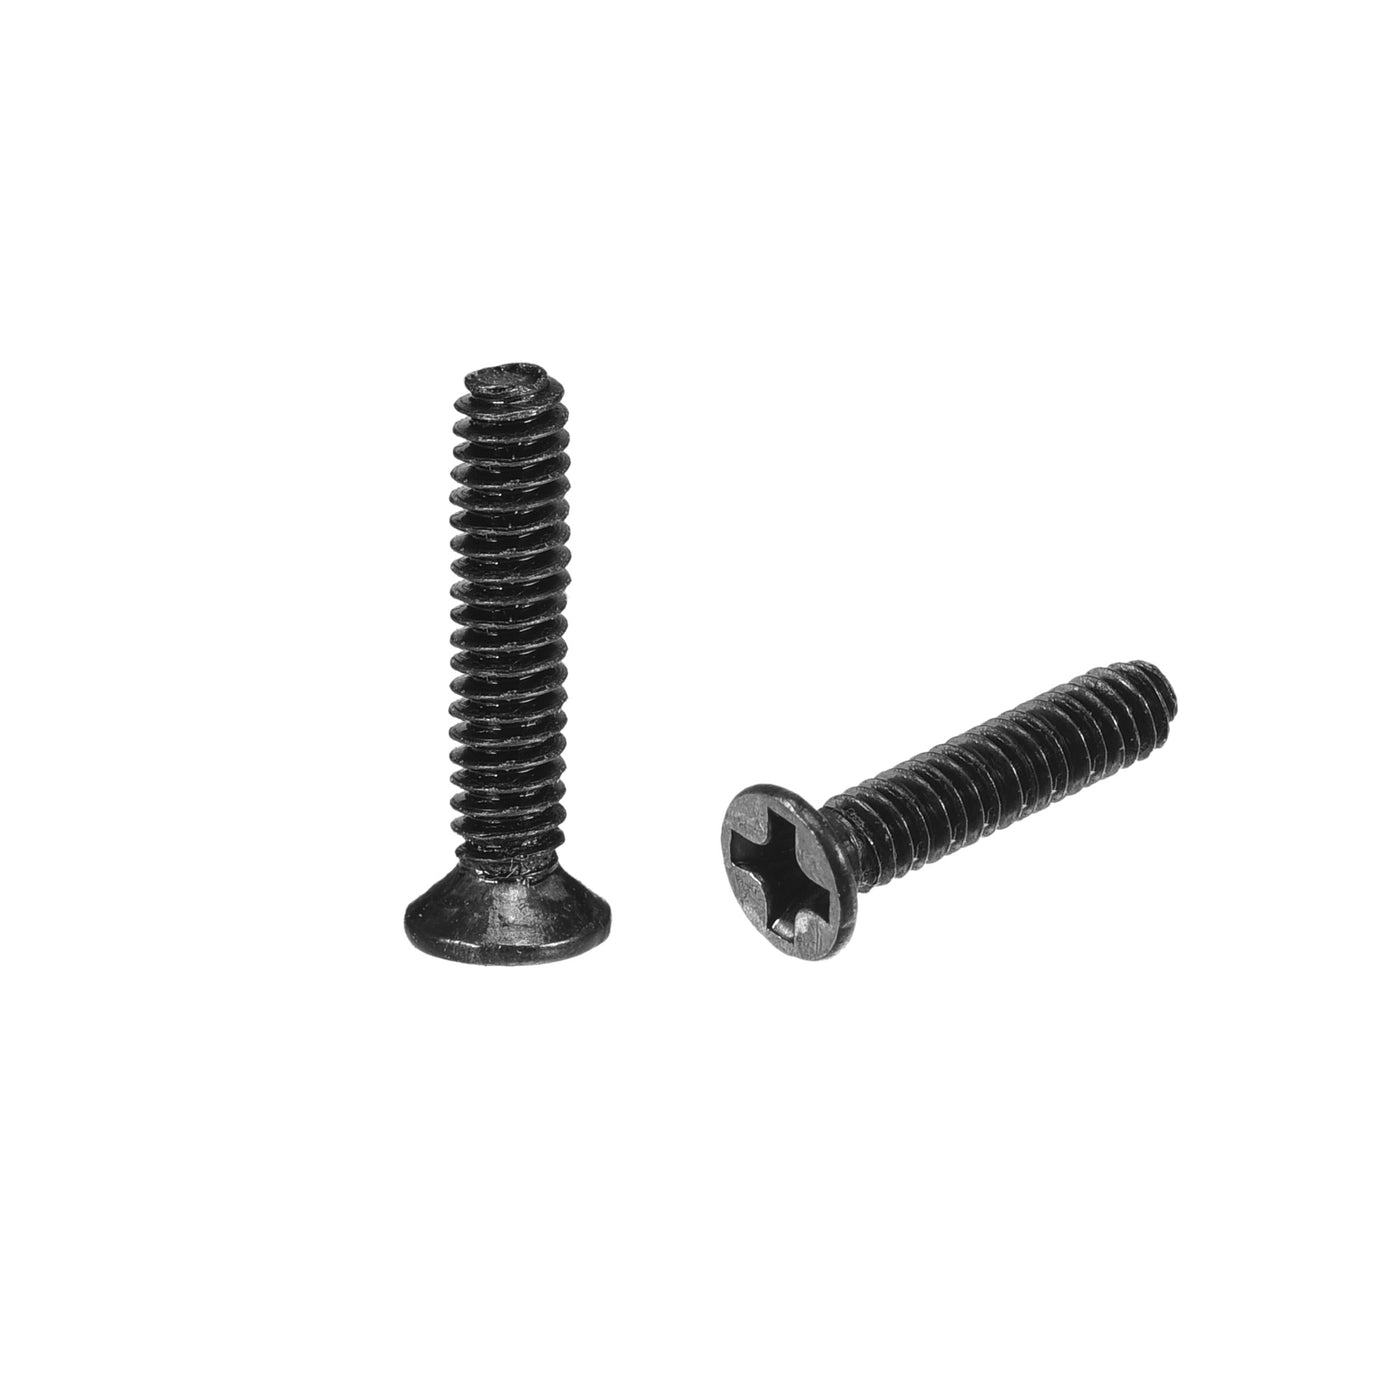 uxcell Uxcell M2 x 10mm Phillips Flat Head Screws Carbon Steel Machine Screws Black for Home Office Computer Case Appliance Equipment 350pcs